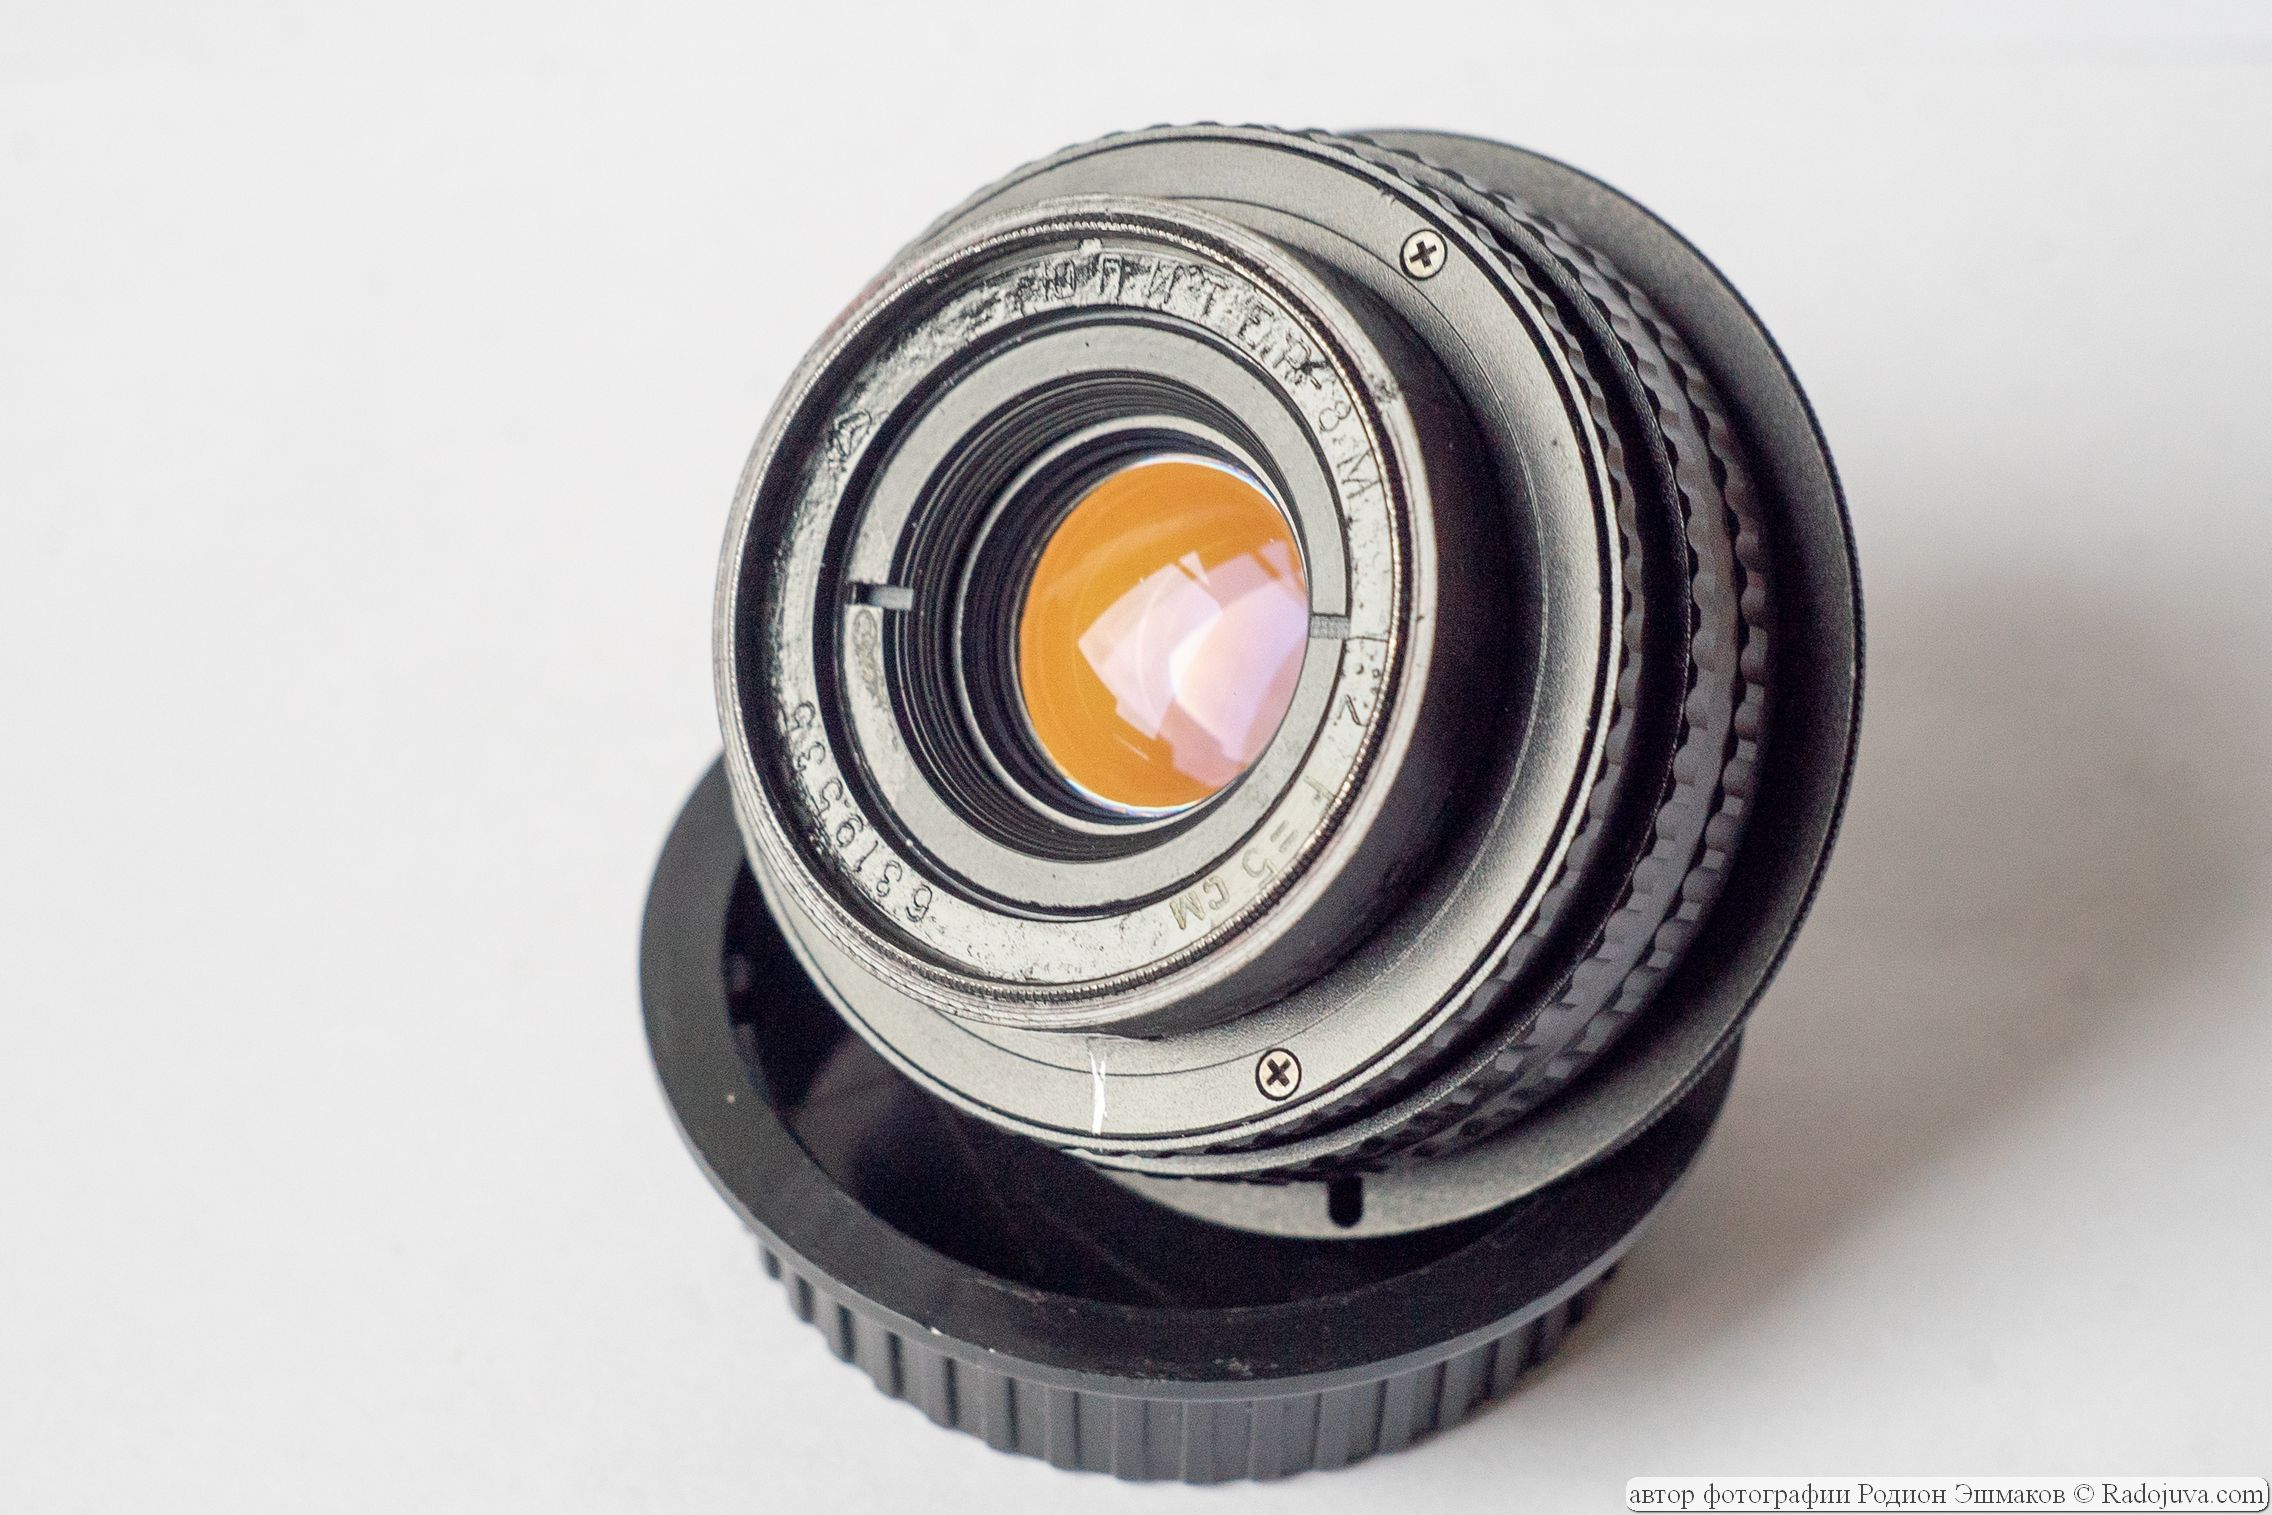 Front view of the adapted lens.